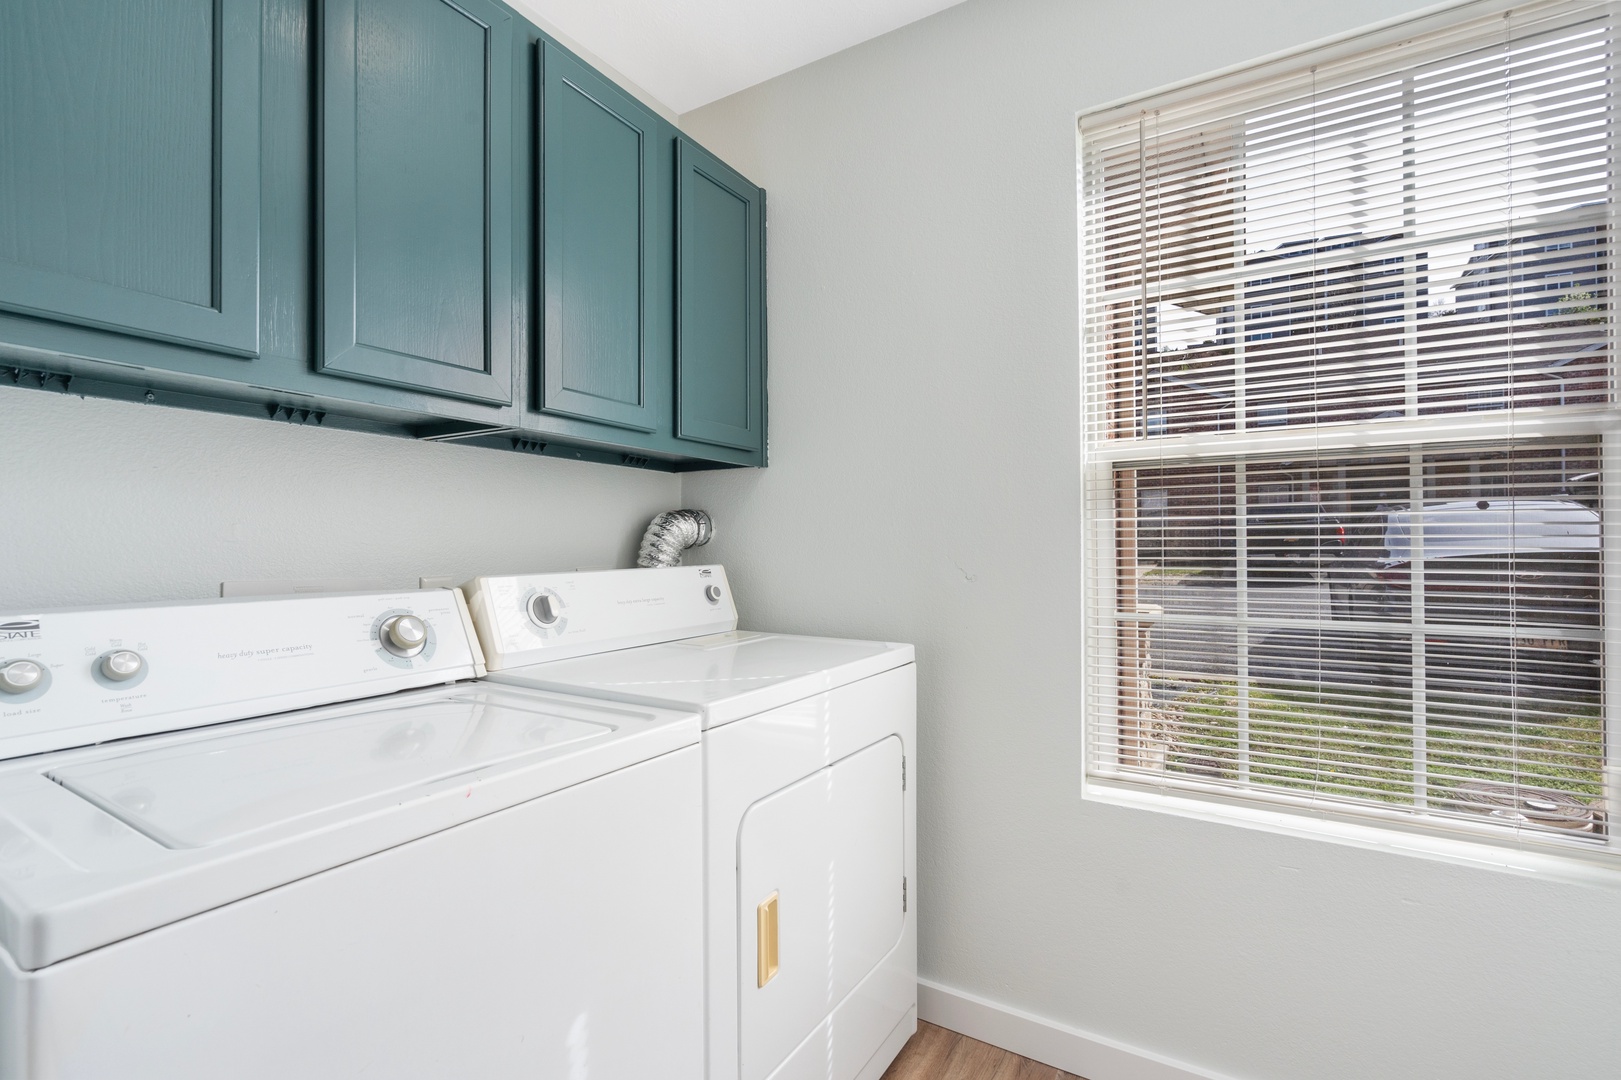 Private laundry is available for your stay, tucked away off the kitchen